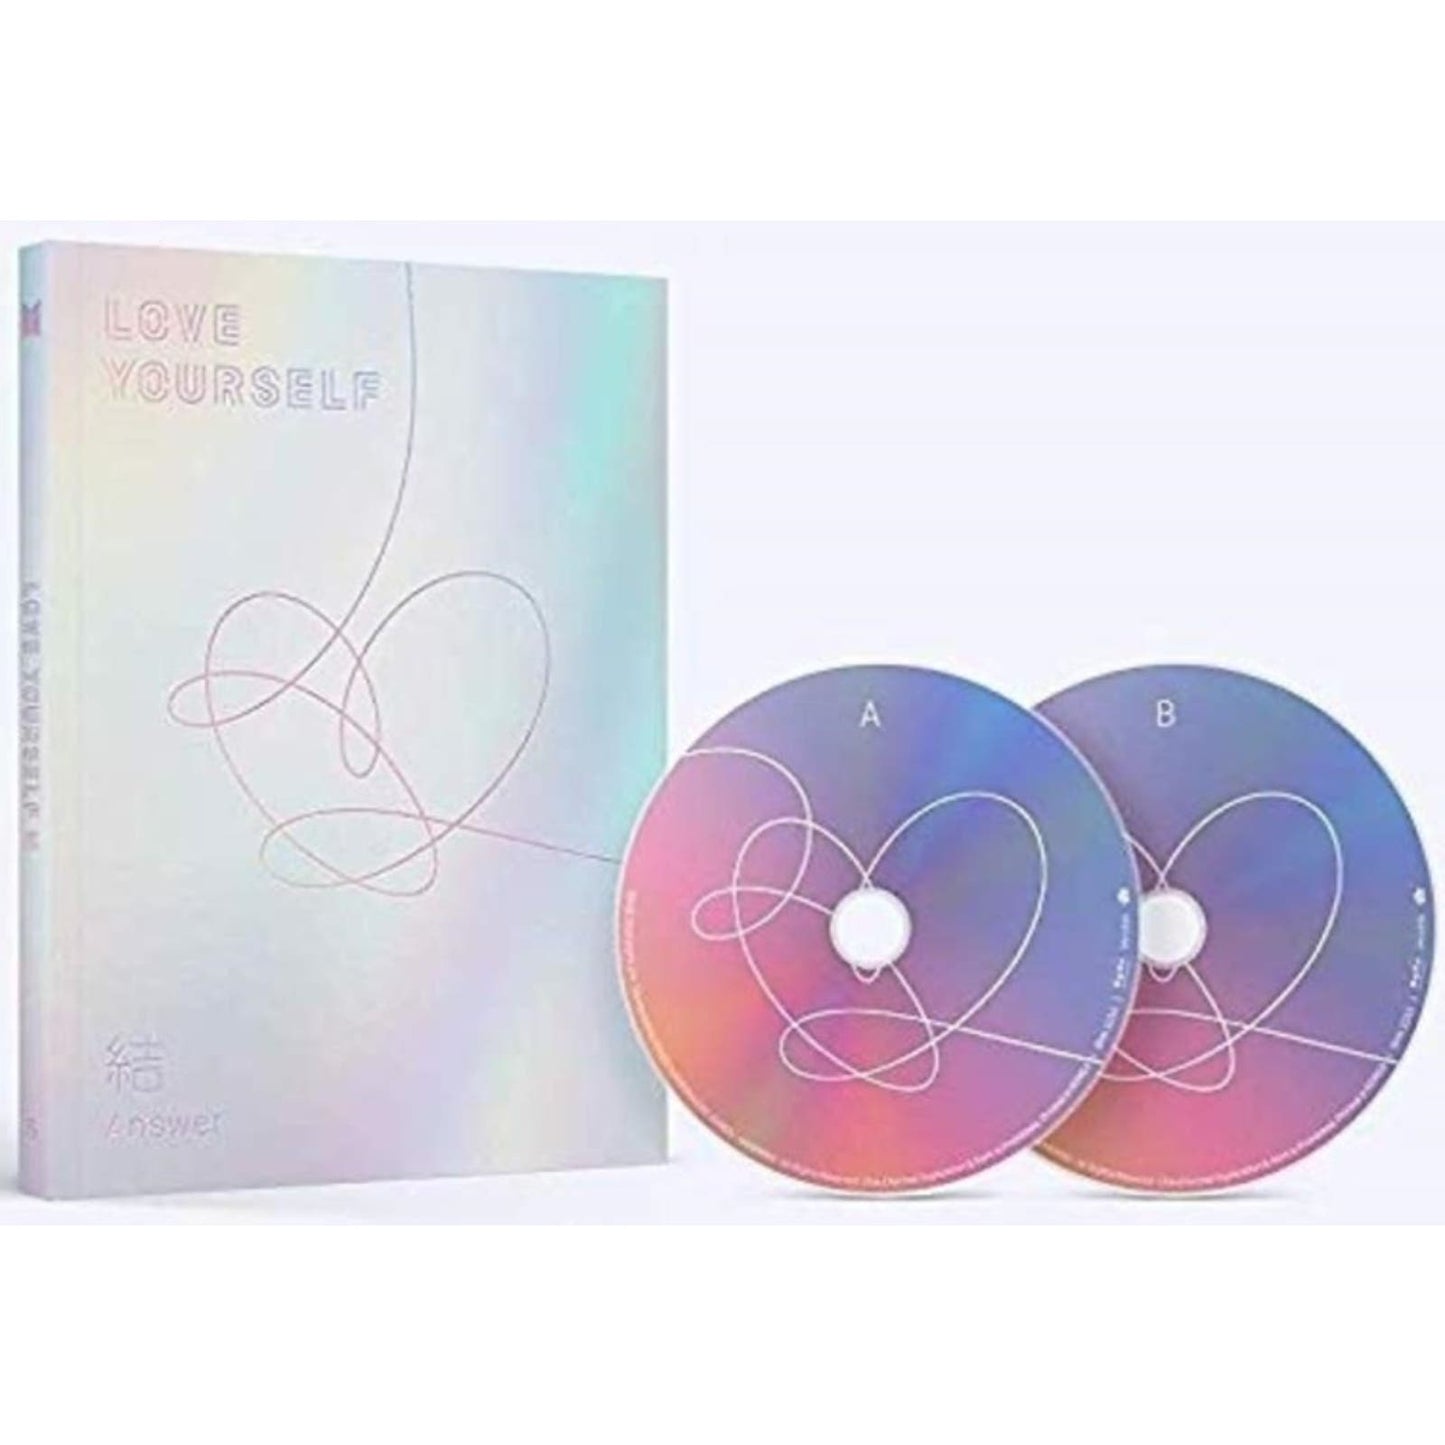 LOVE YOURSELF: Answer, Music CD, by South Korean Boy Band BTS, K-Pop